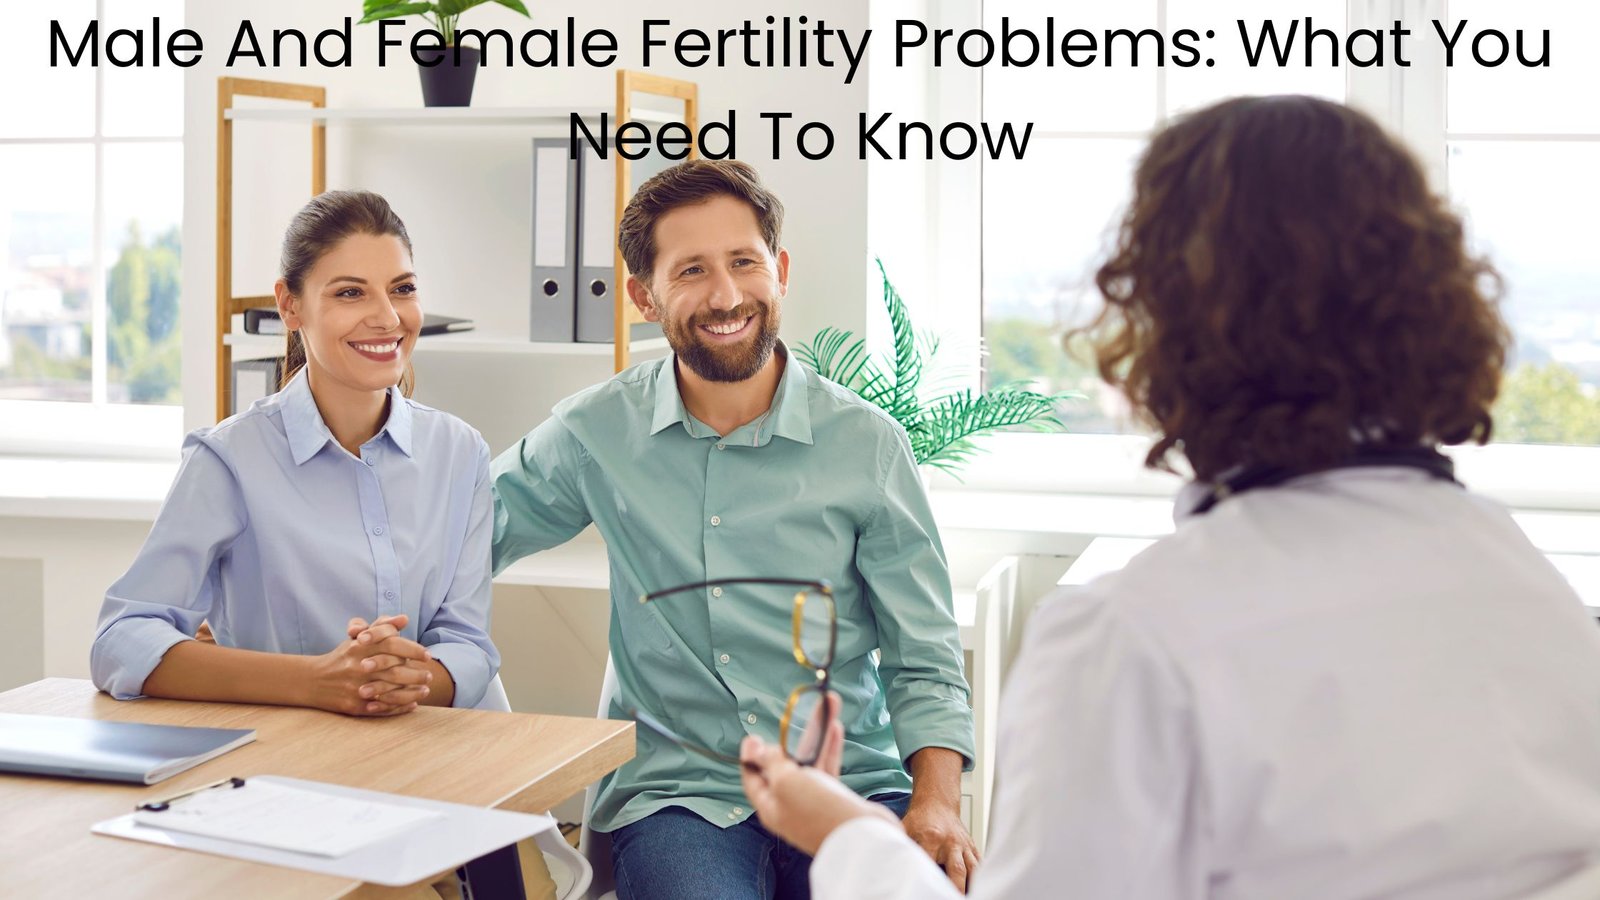 Male and Female Fertility Problems: What You Need To Know